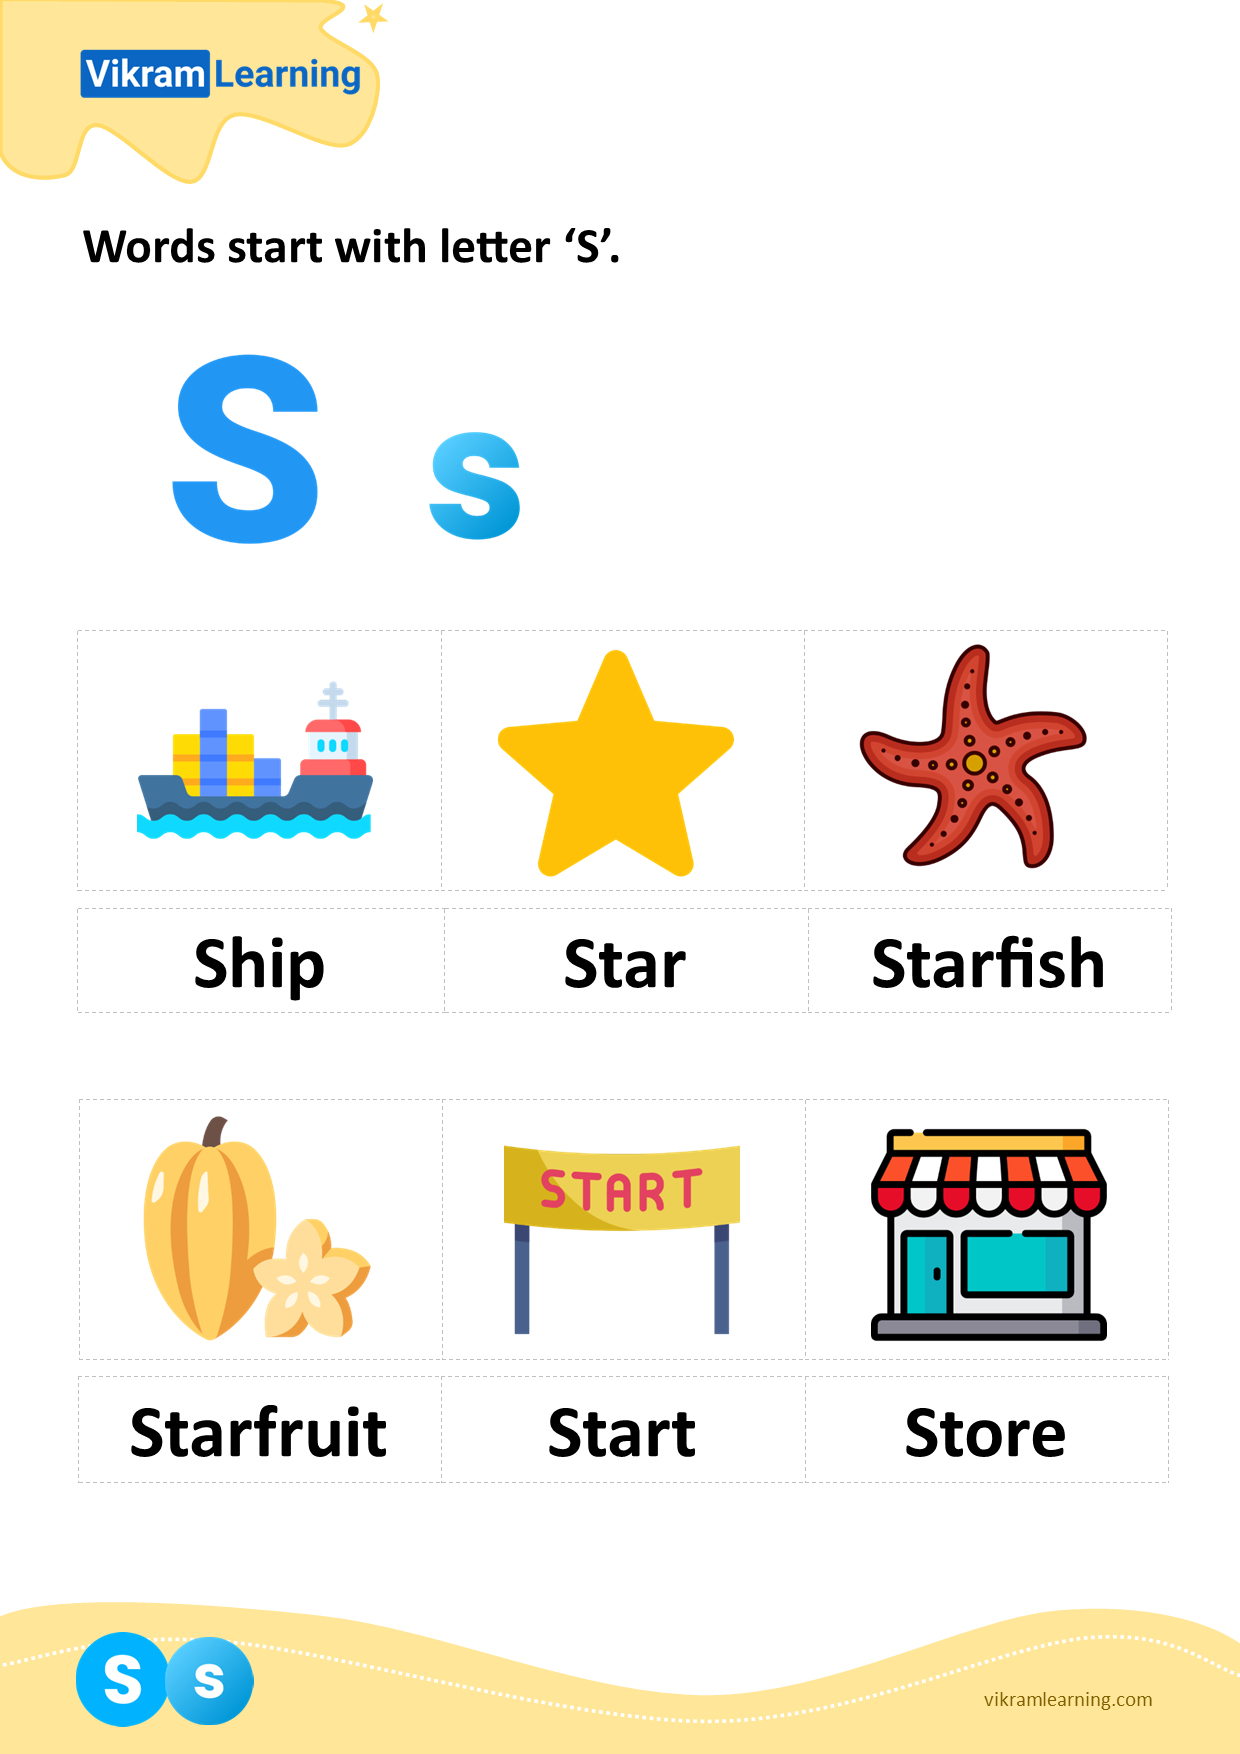 Download words start with letter 's' worksheets